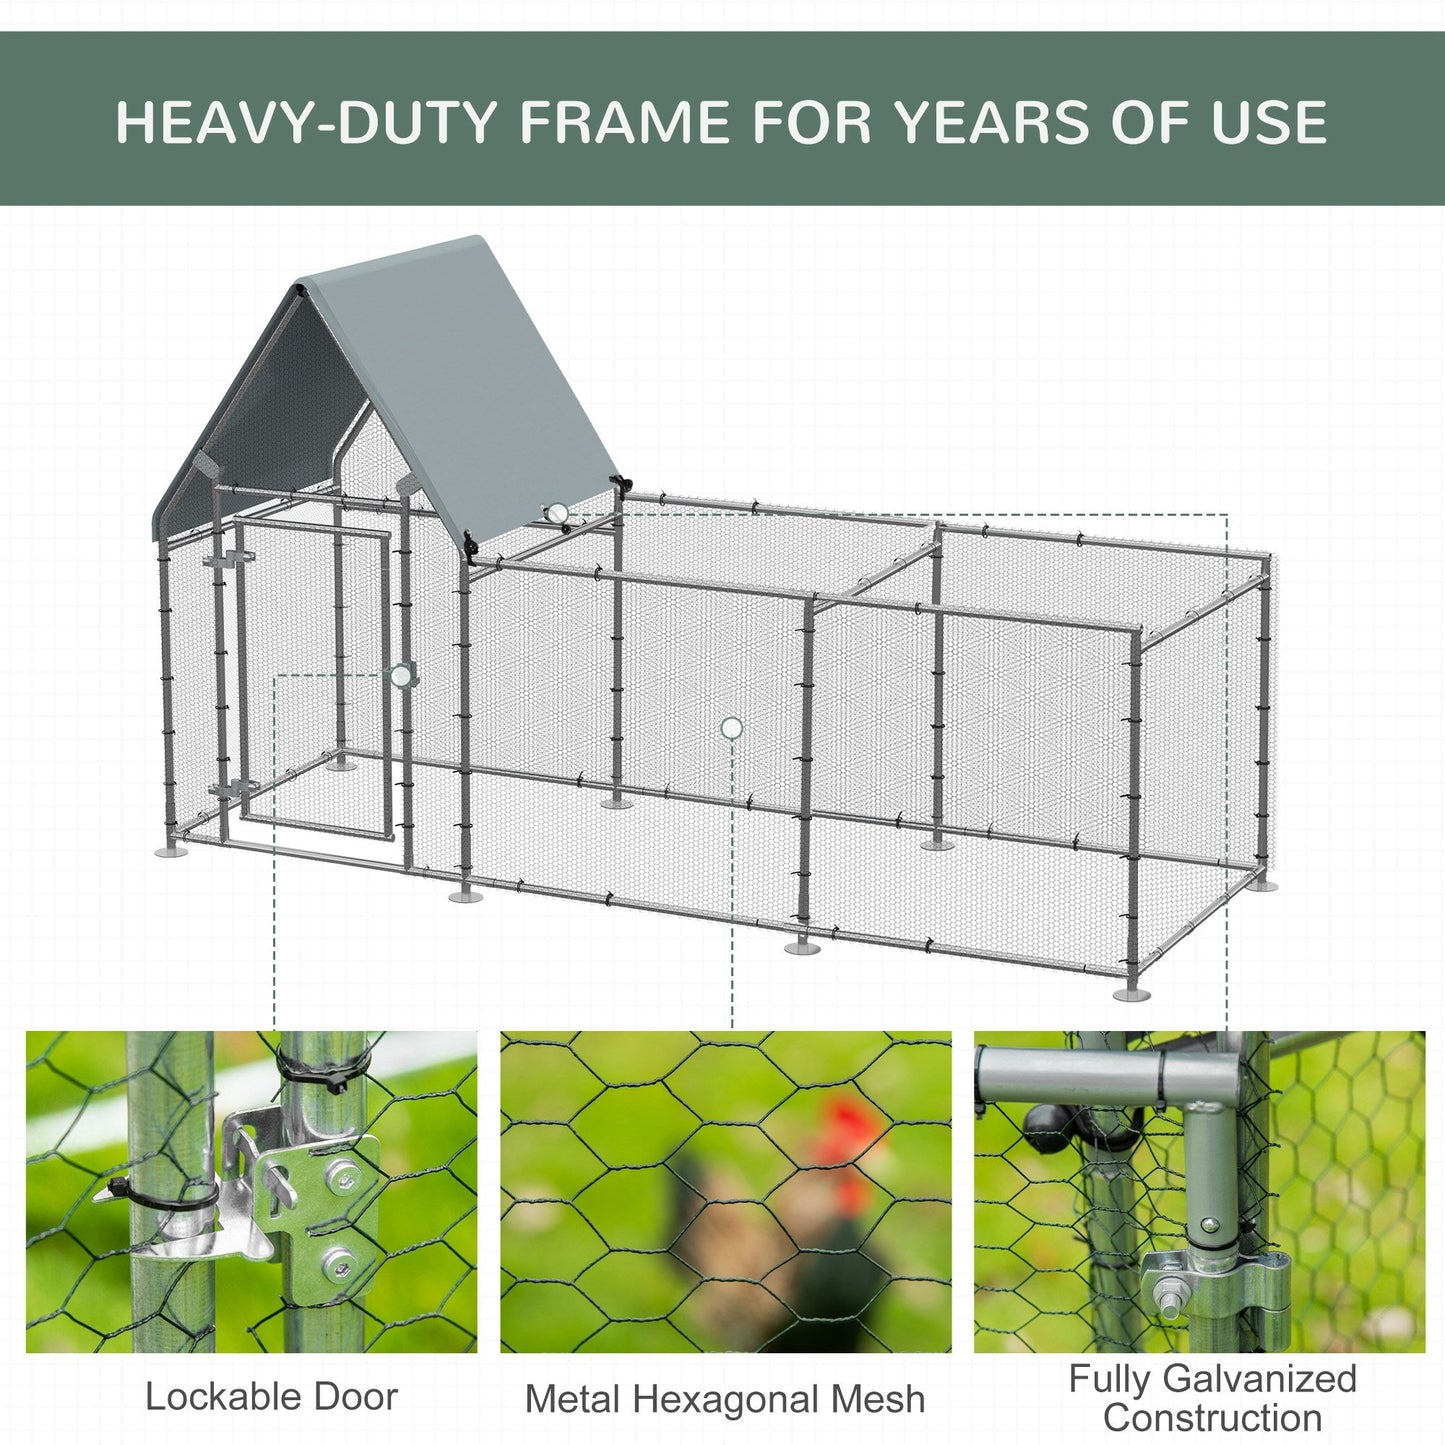 Walk In Chicken Run, Large Galvanized Chicken Coop, Hen Poultry House Cage, Rabbit Hutch Metal Enclosure with Water-Resist Cover for Outdoor Backyard Farm, 119" x 42" x 68" at Gallery Canada